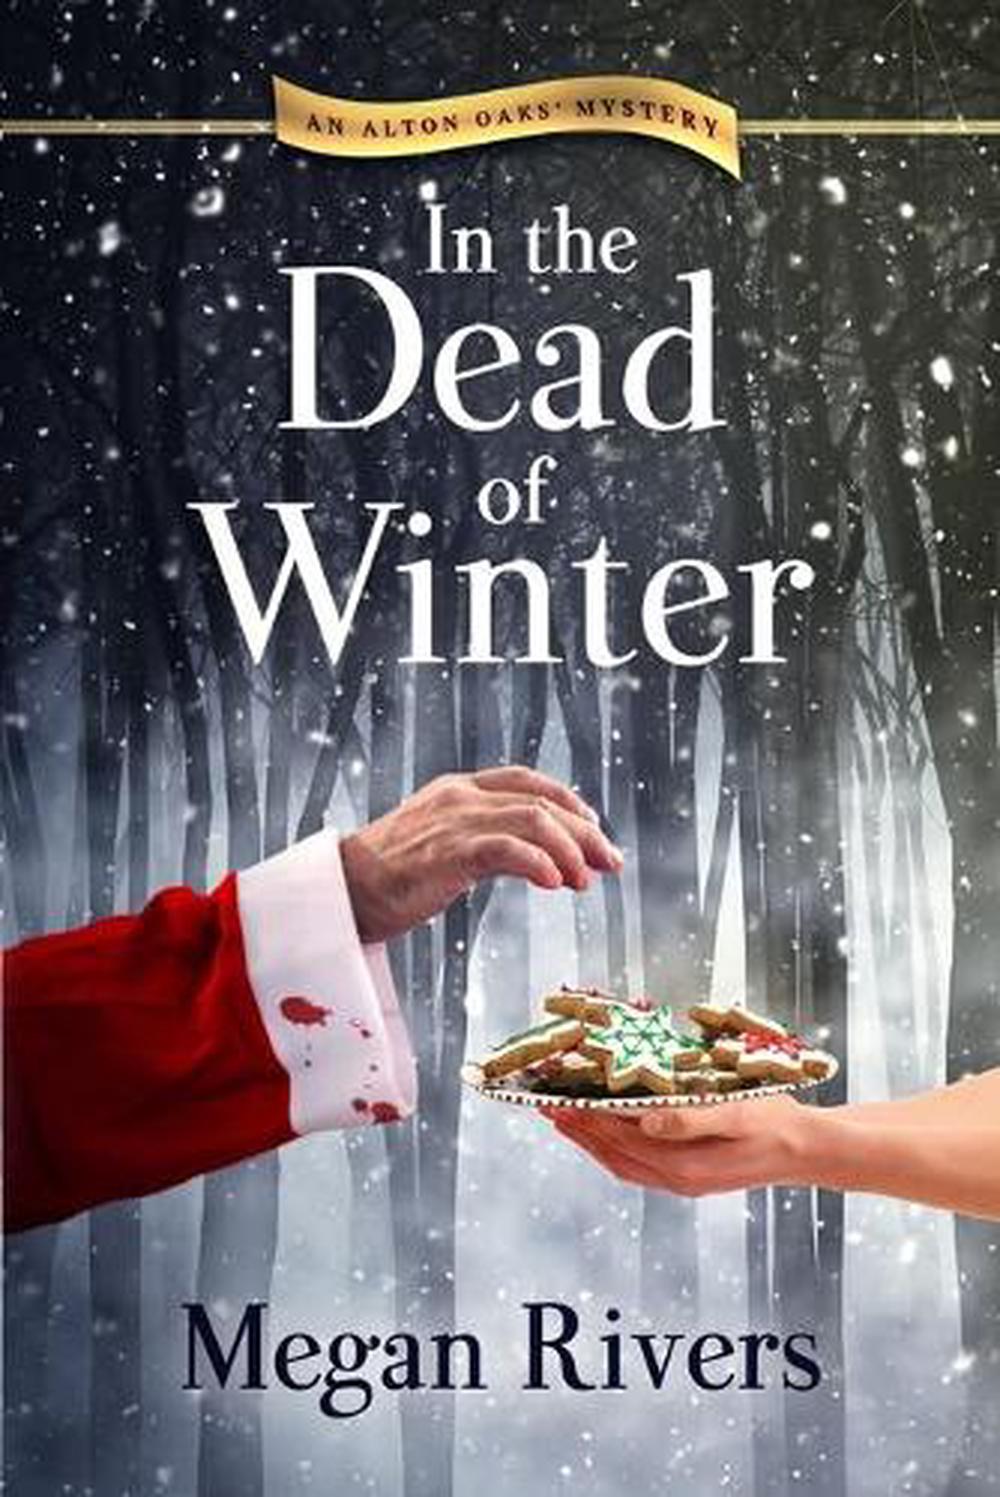 the dead of winter by chris priestley